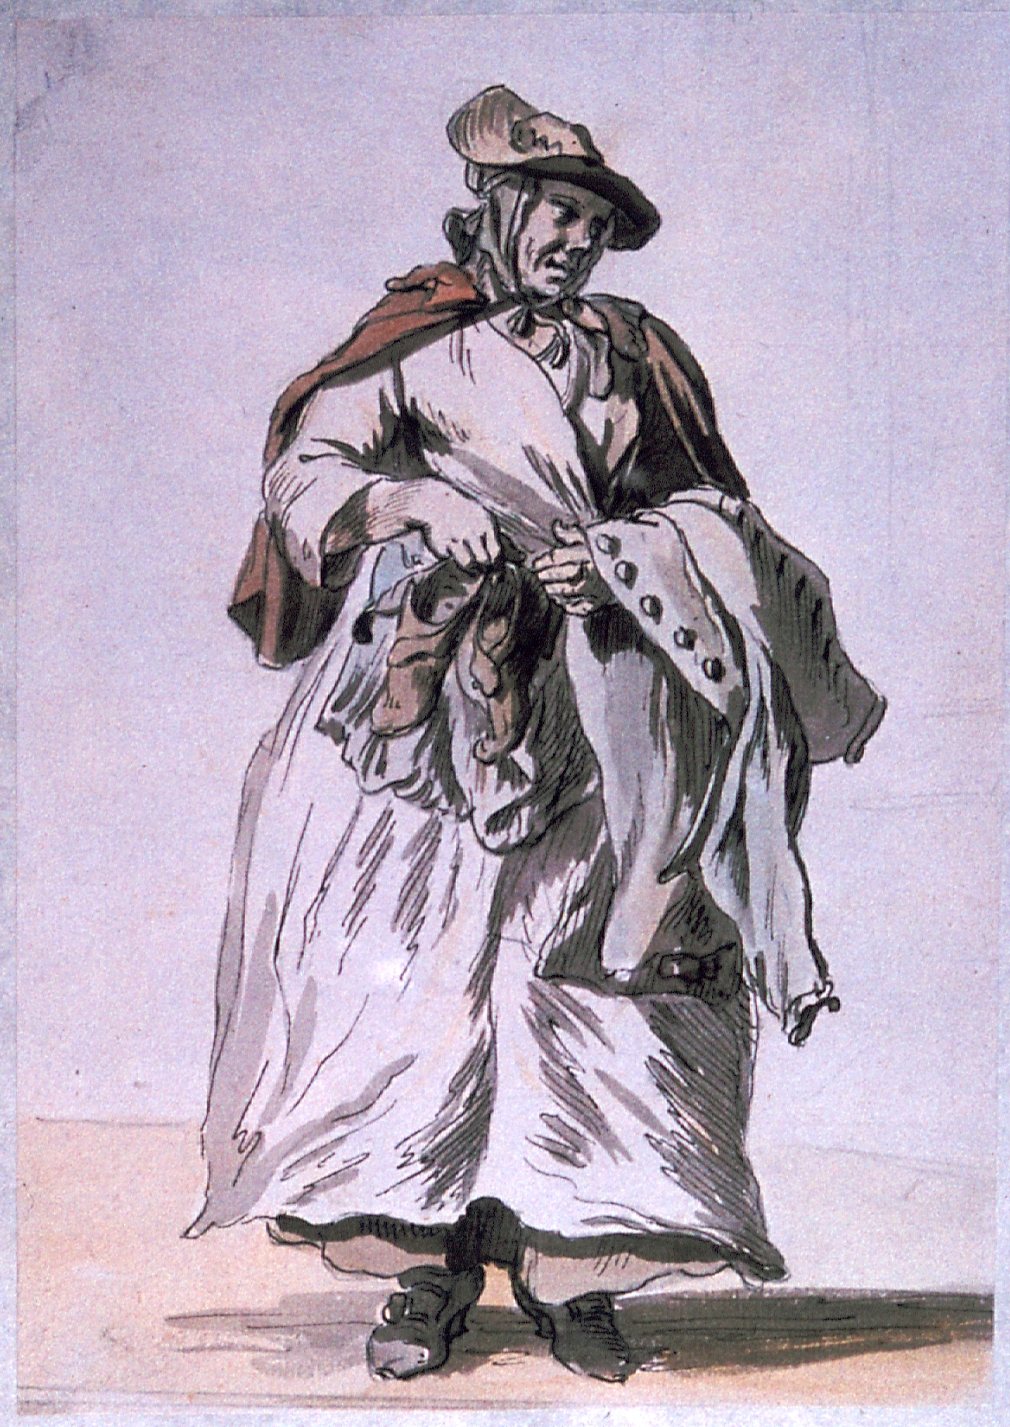 An older women with a pair of shoes in one hand, and a man's jacket over one arm